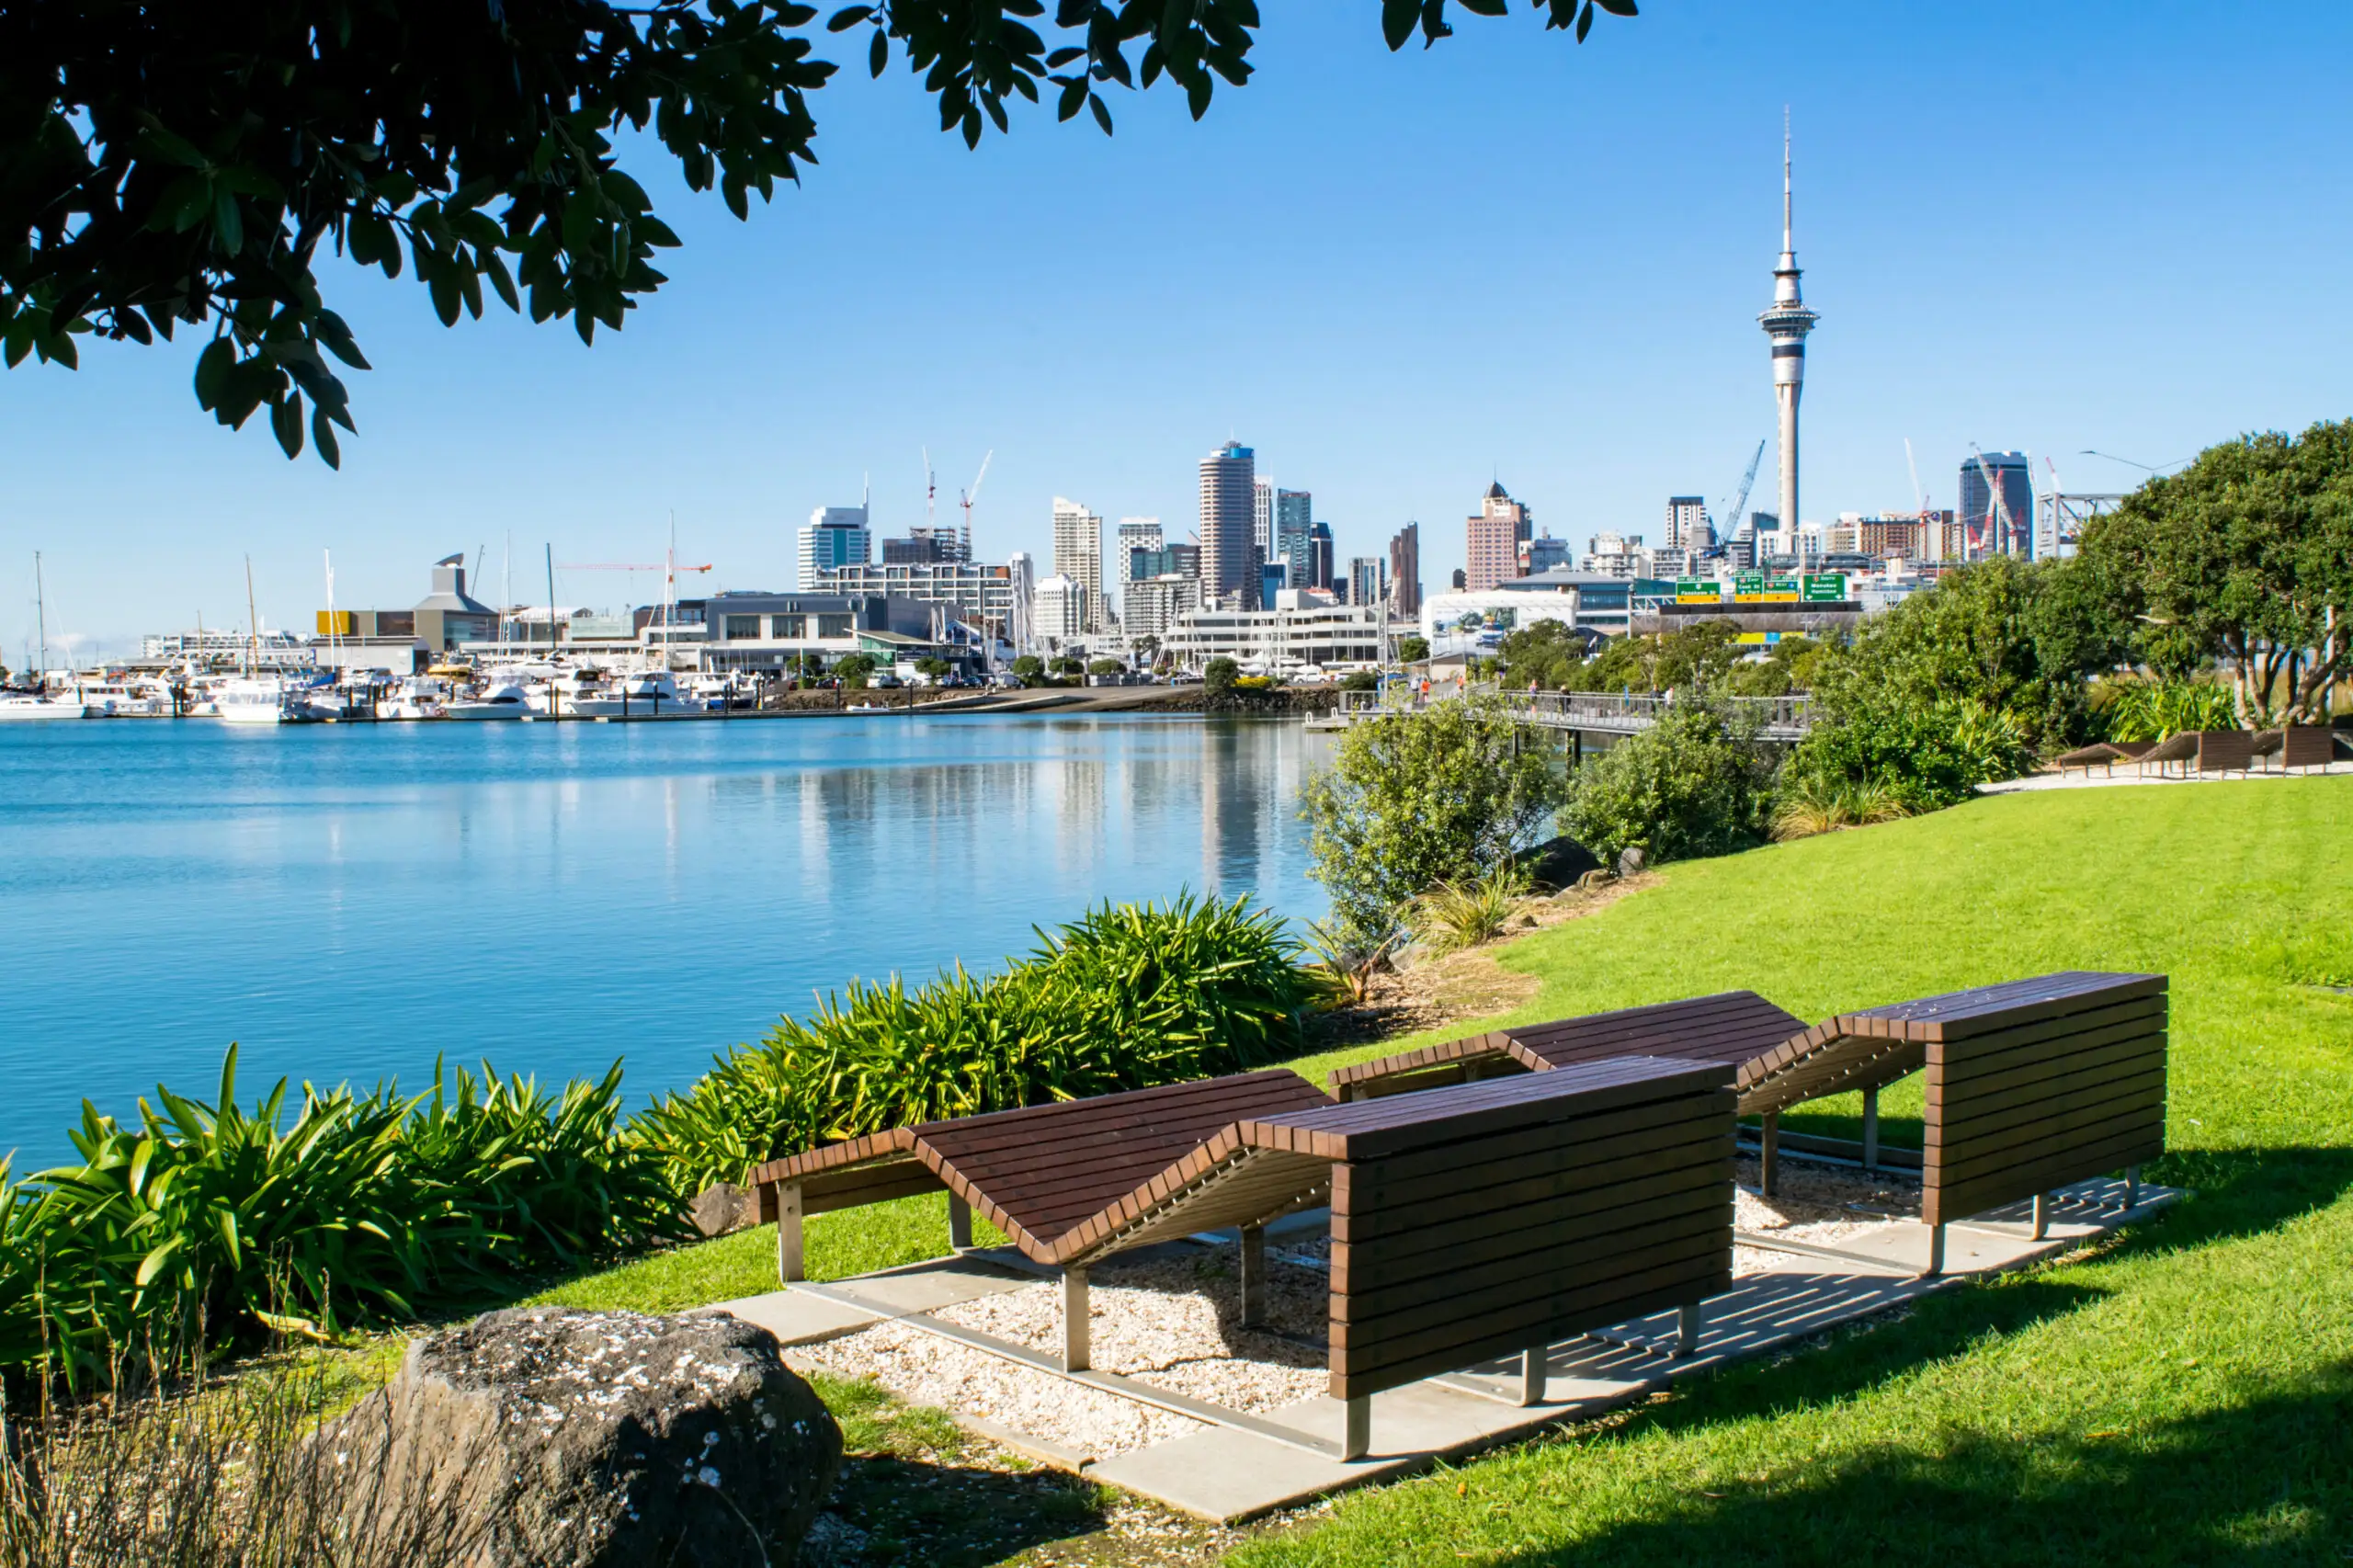 Benches in Waterfront Park with view of downtown Auckland, New Zealand